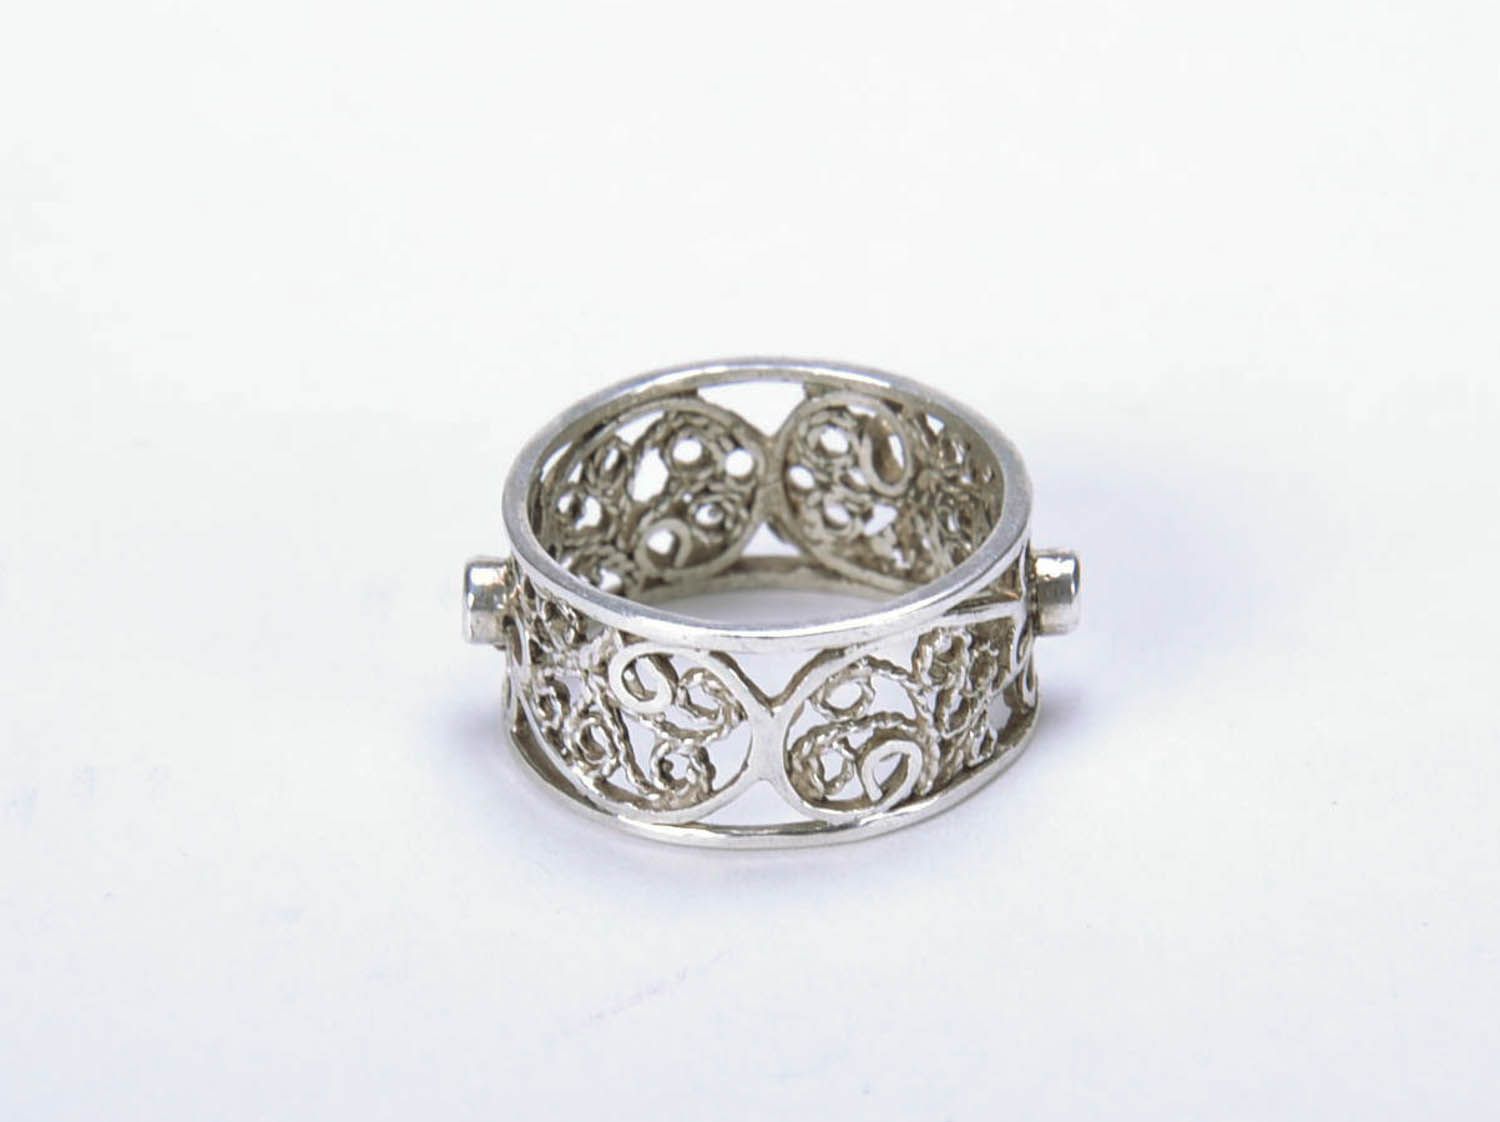 Homemade silver ring photo 2